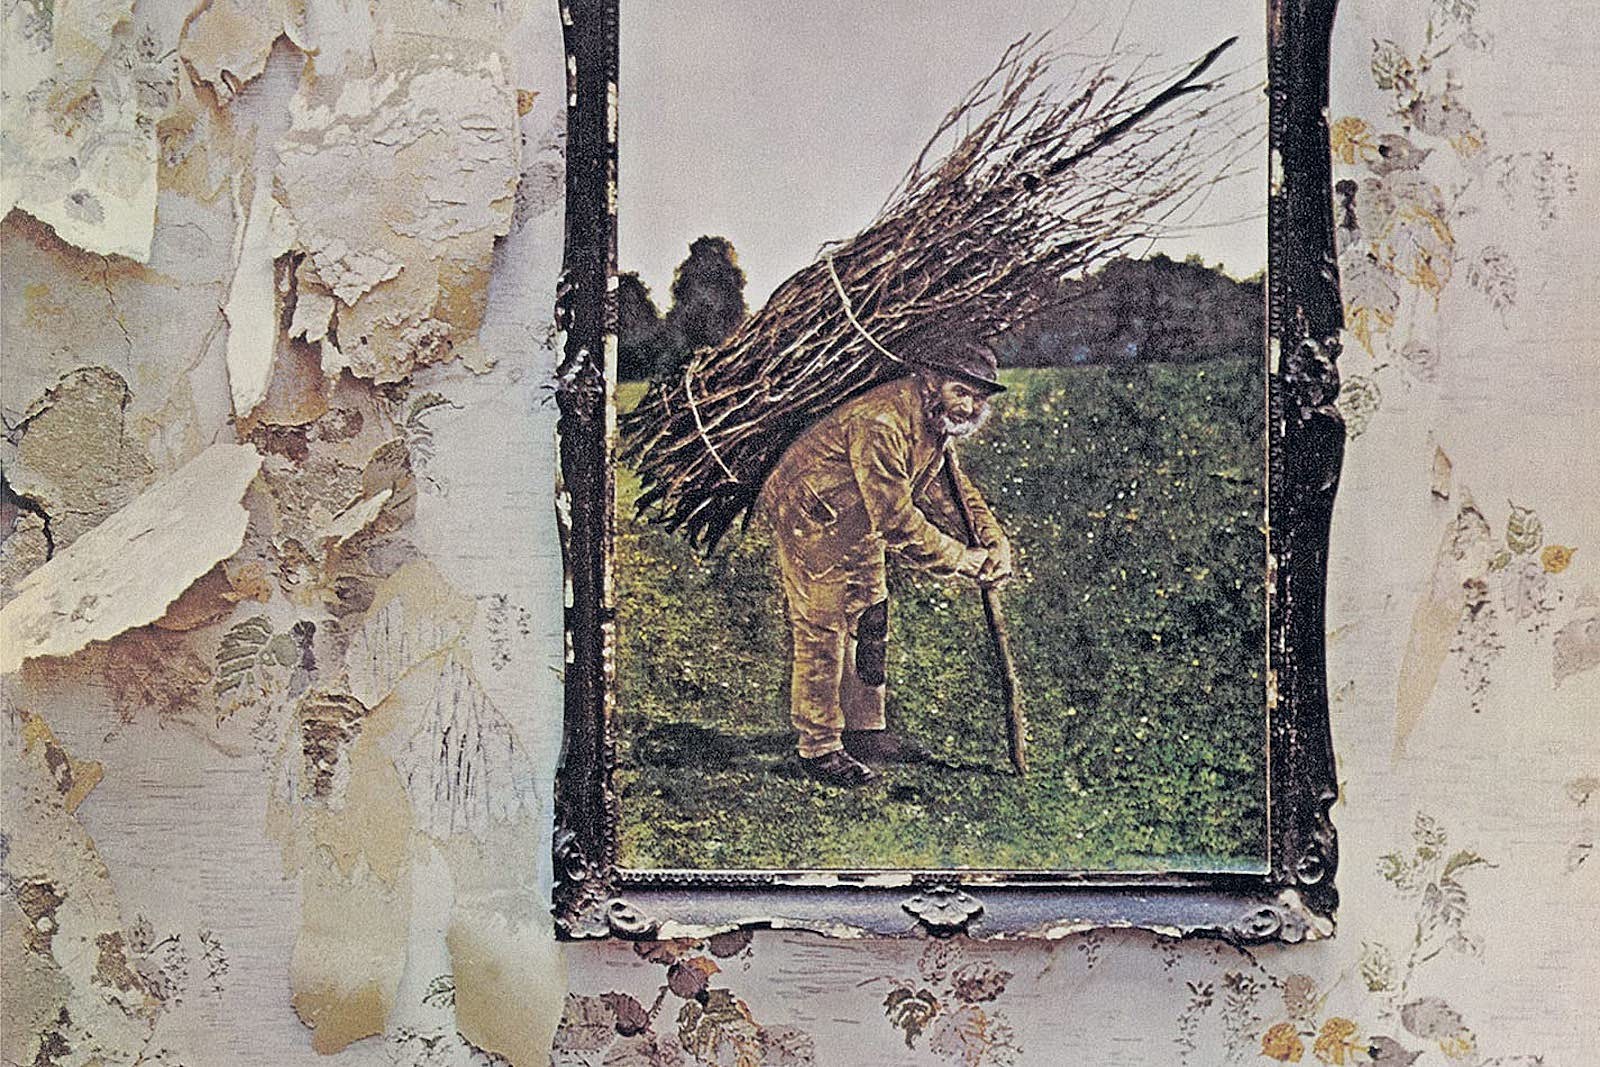 How Hiding Away Helped Led Zeppelin to Greatness on ‘IV’